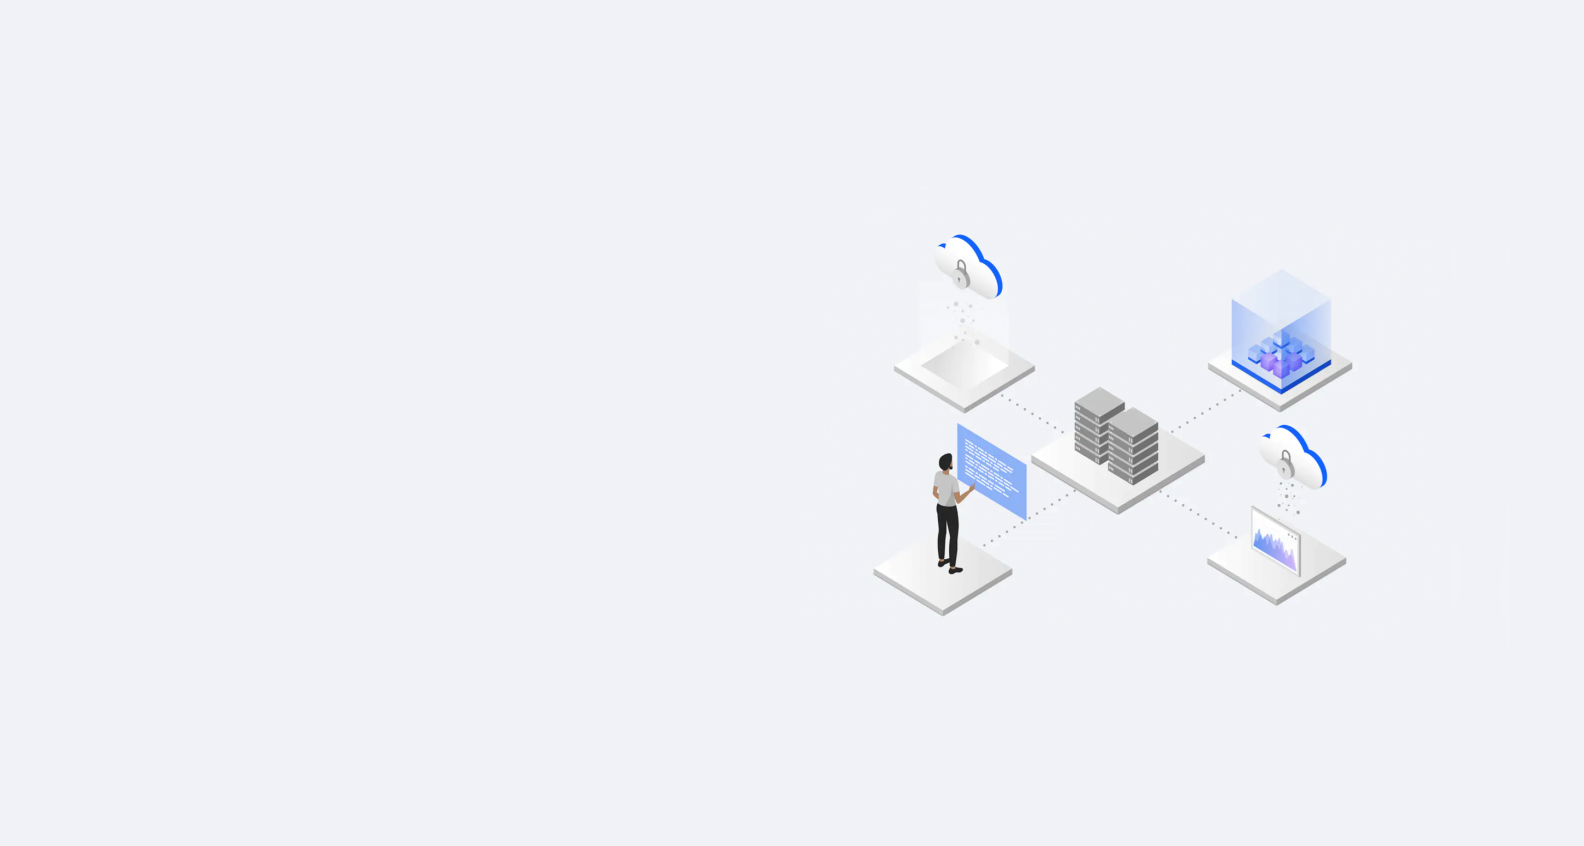 Isometric illustration of a person analyzing data on a dashboard connected to secure, scalable cloud storage options